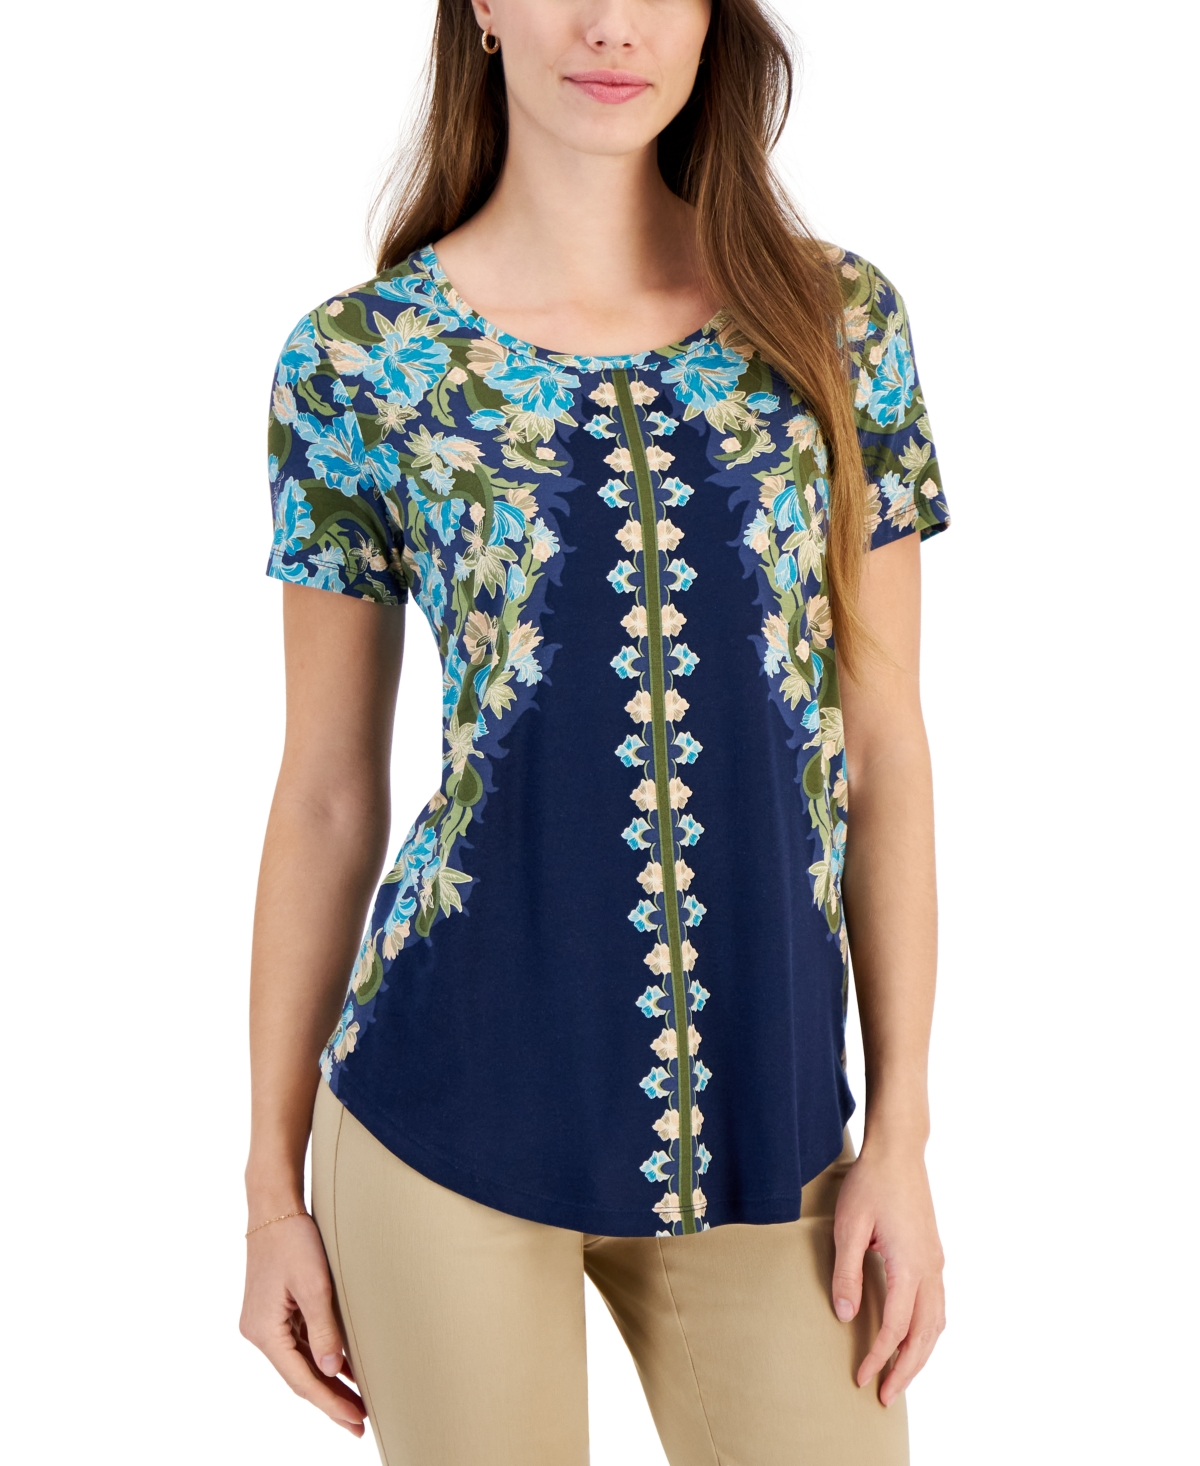 Petite Oaklyn Ornate Short-Sleeve Top, Created for Macy's - Intrepid Blue Combo